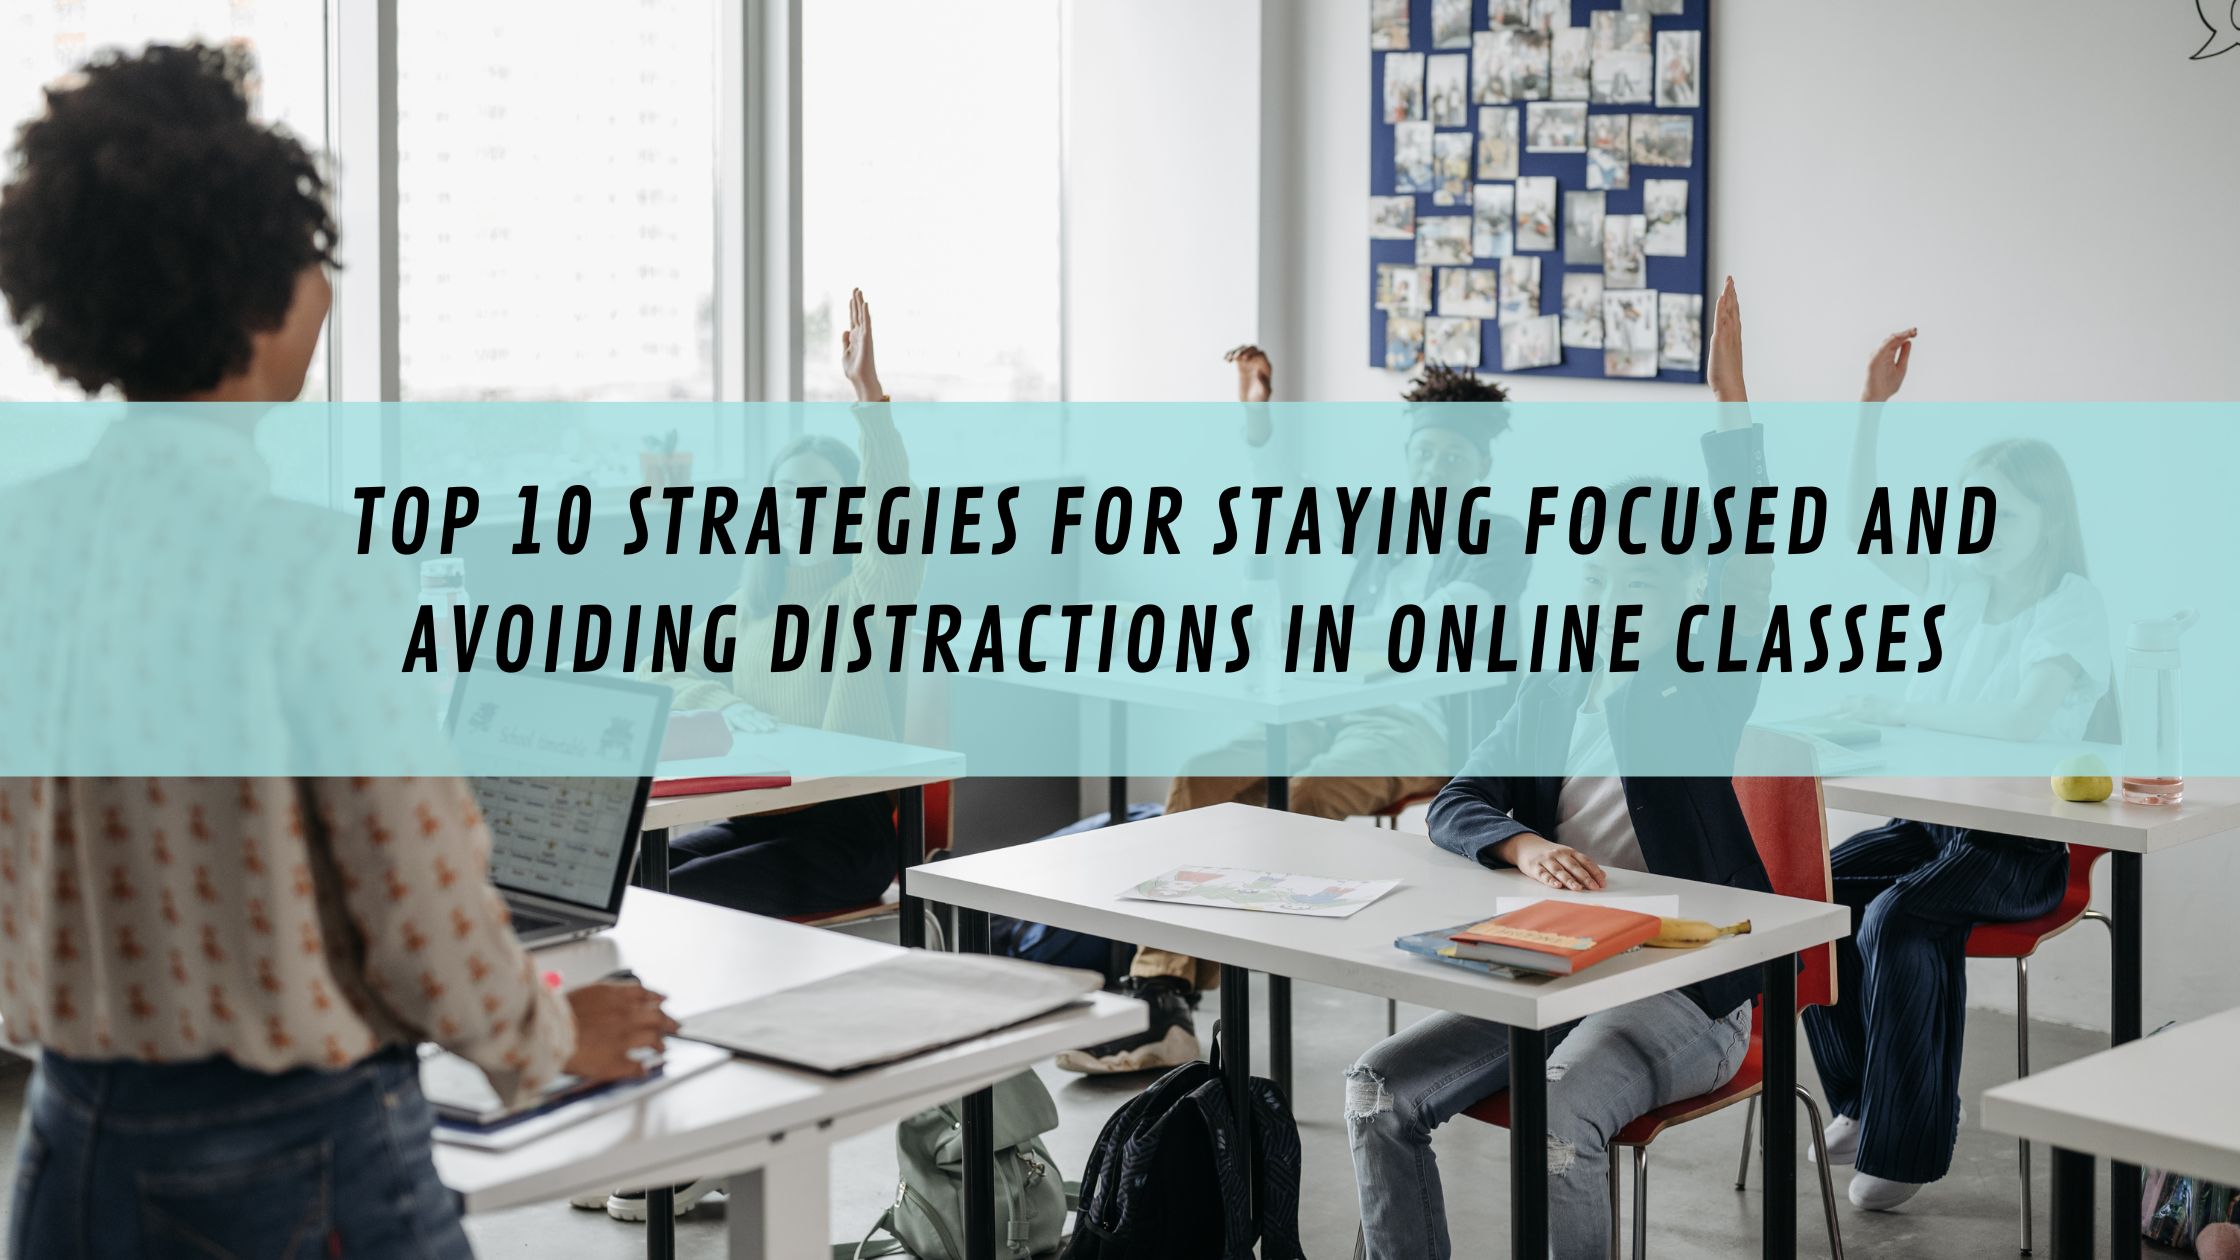 Top 10 Strategies for Staying Focused and Avoiding Distractions in Online Classes